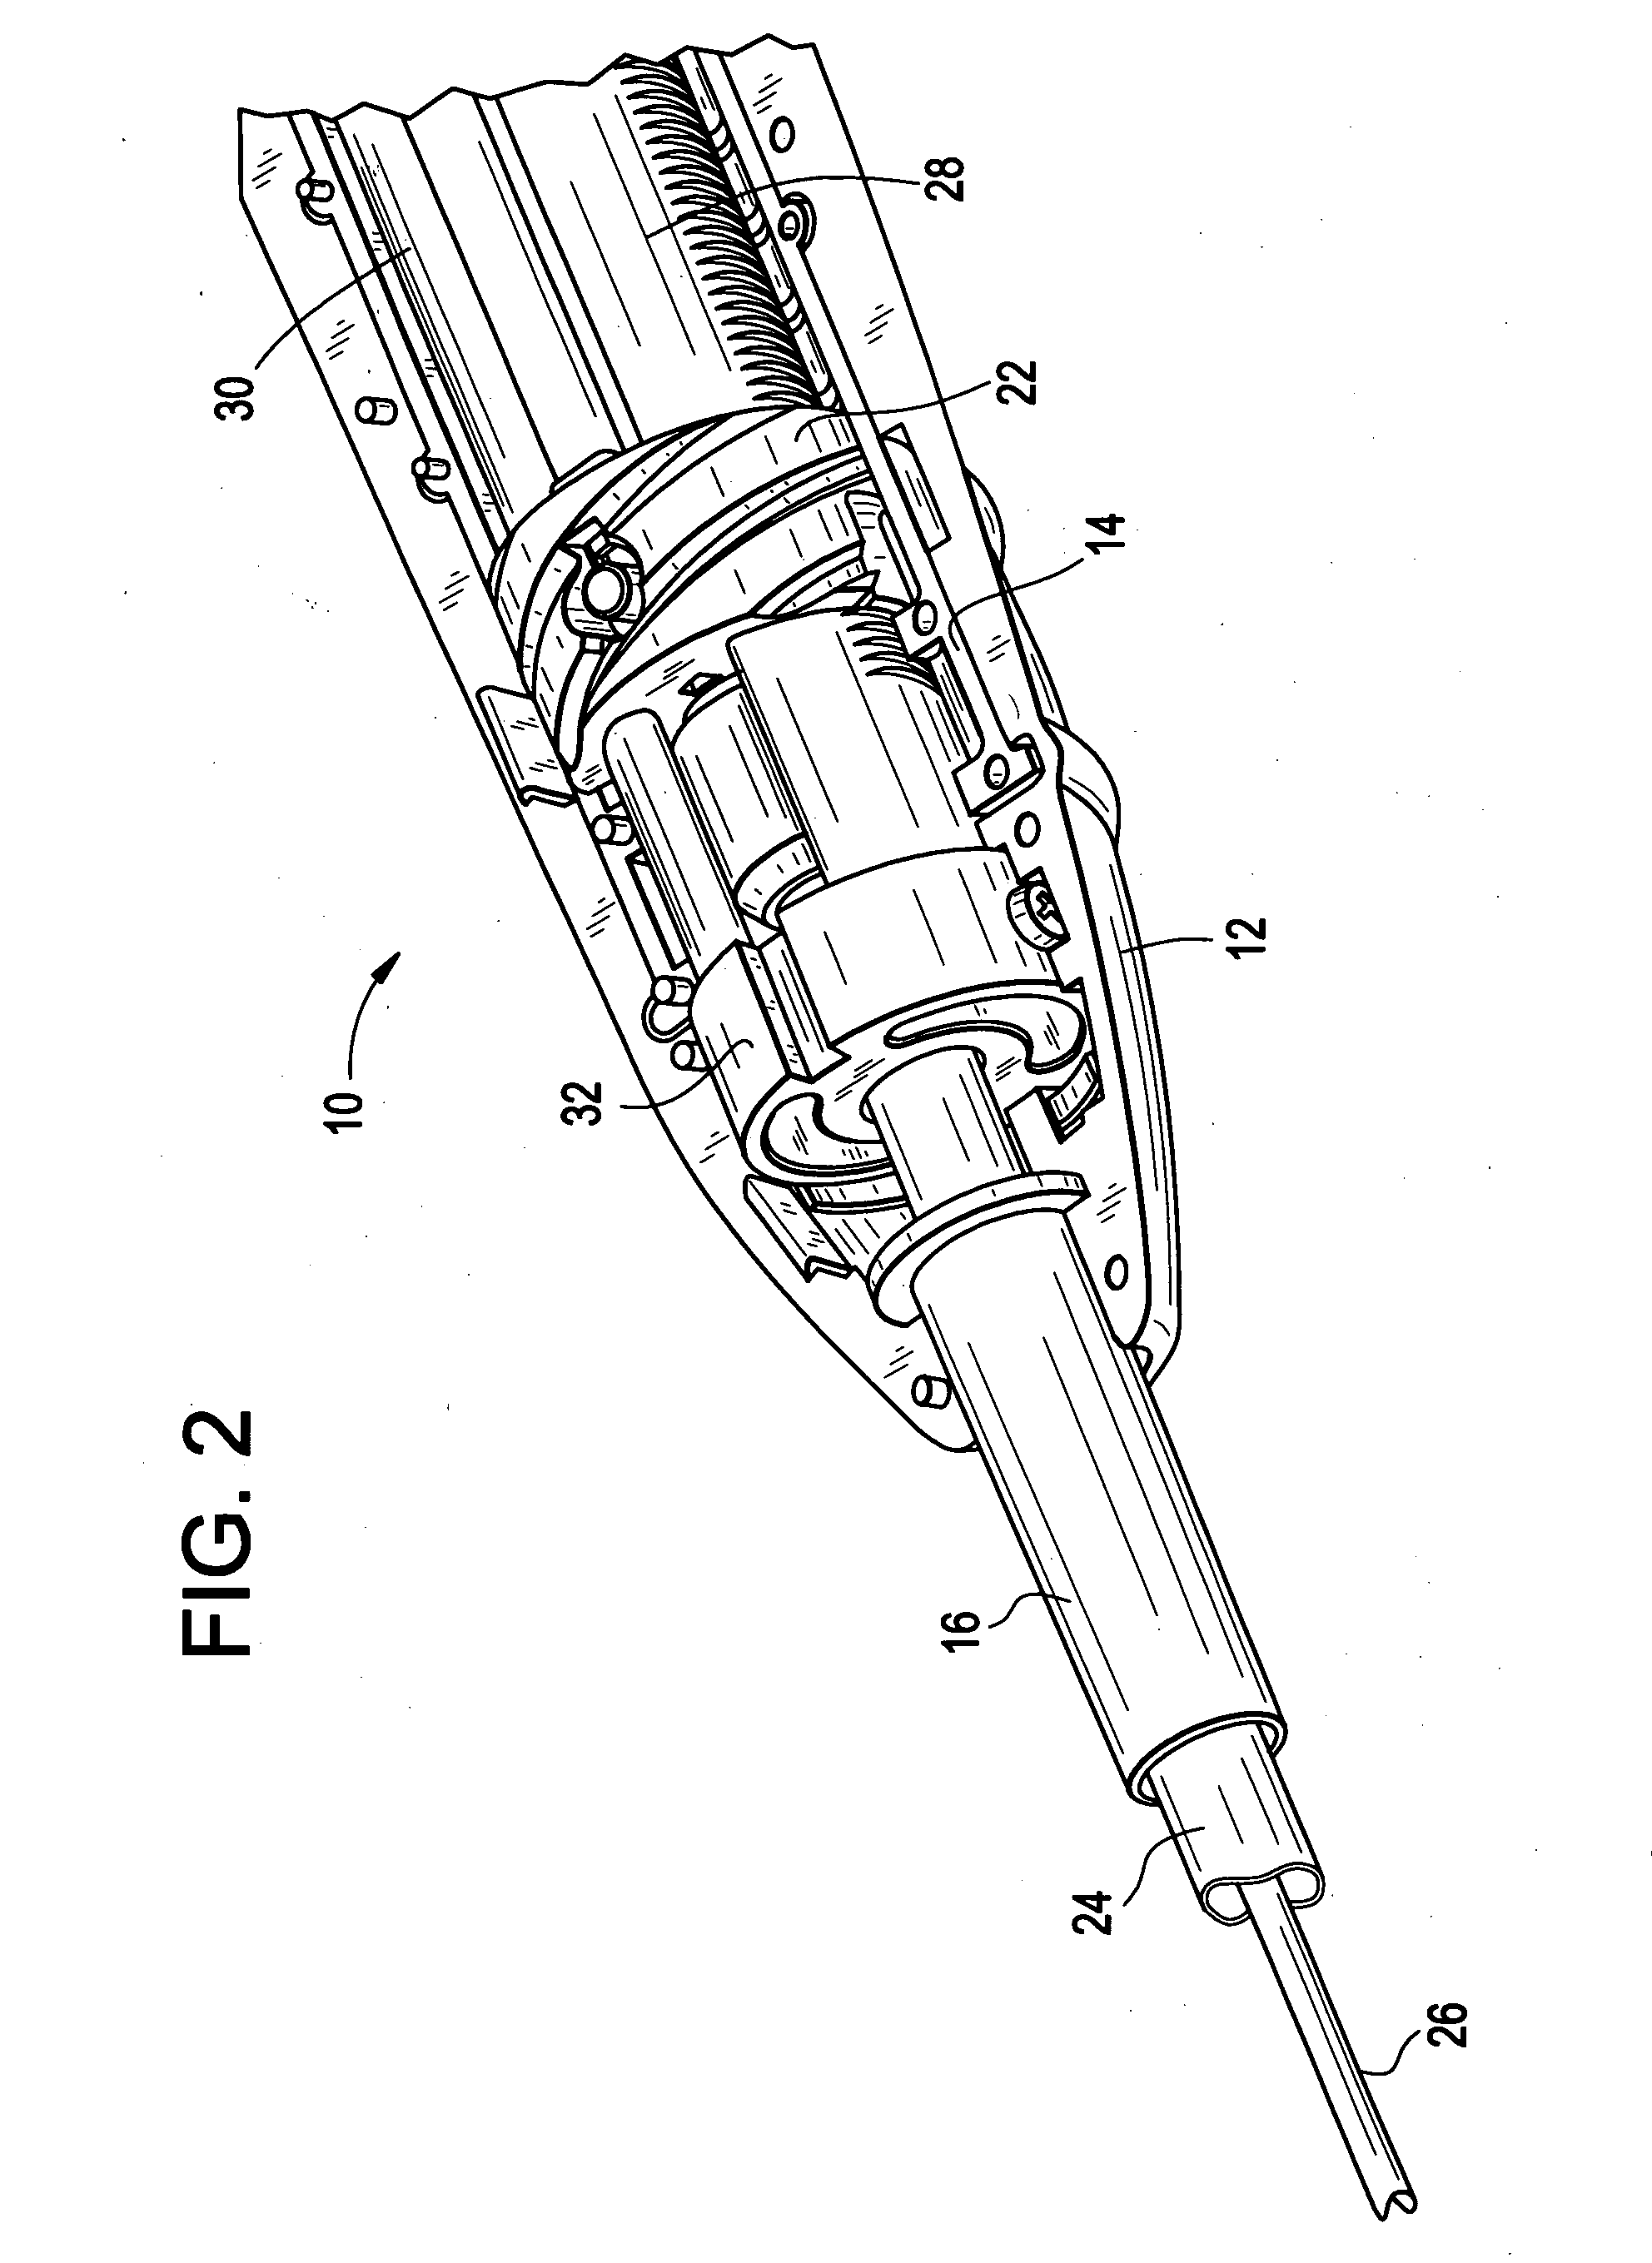 Handle system for deploying a prosthetic implant